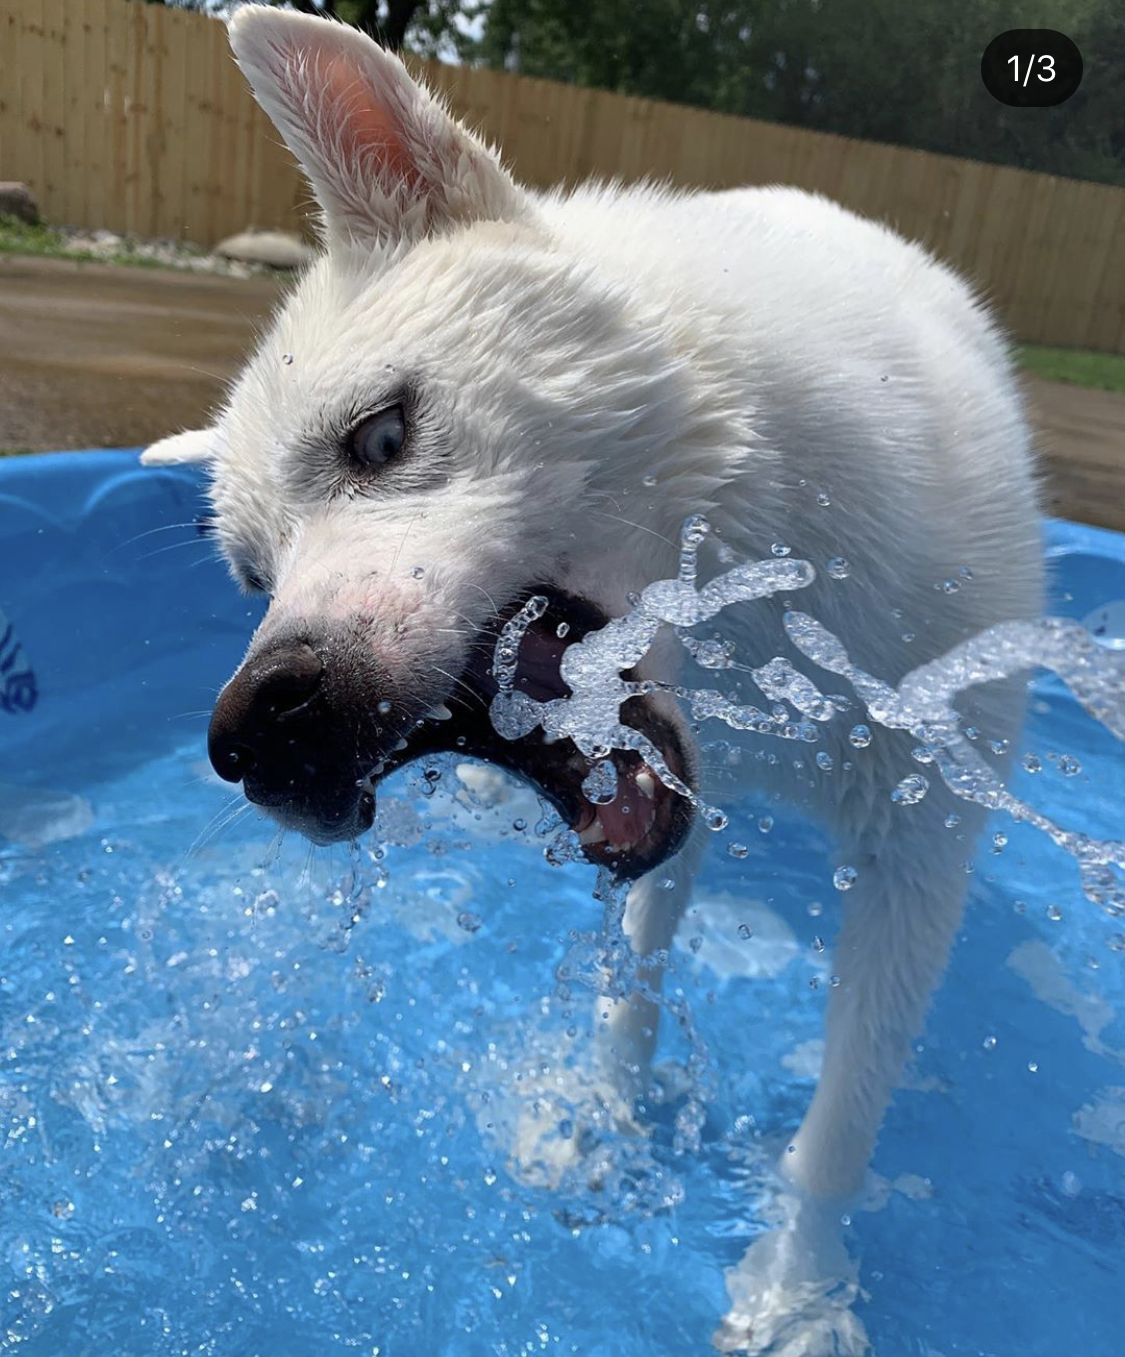 A Husky inside the inflatable pool catching the splash of water